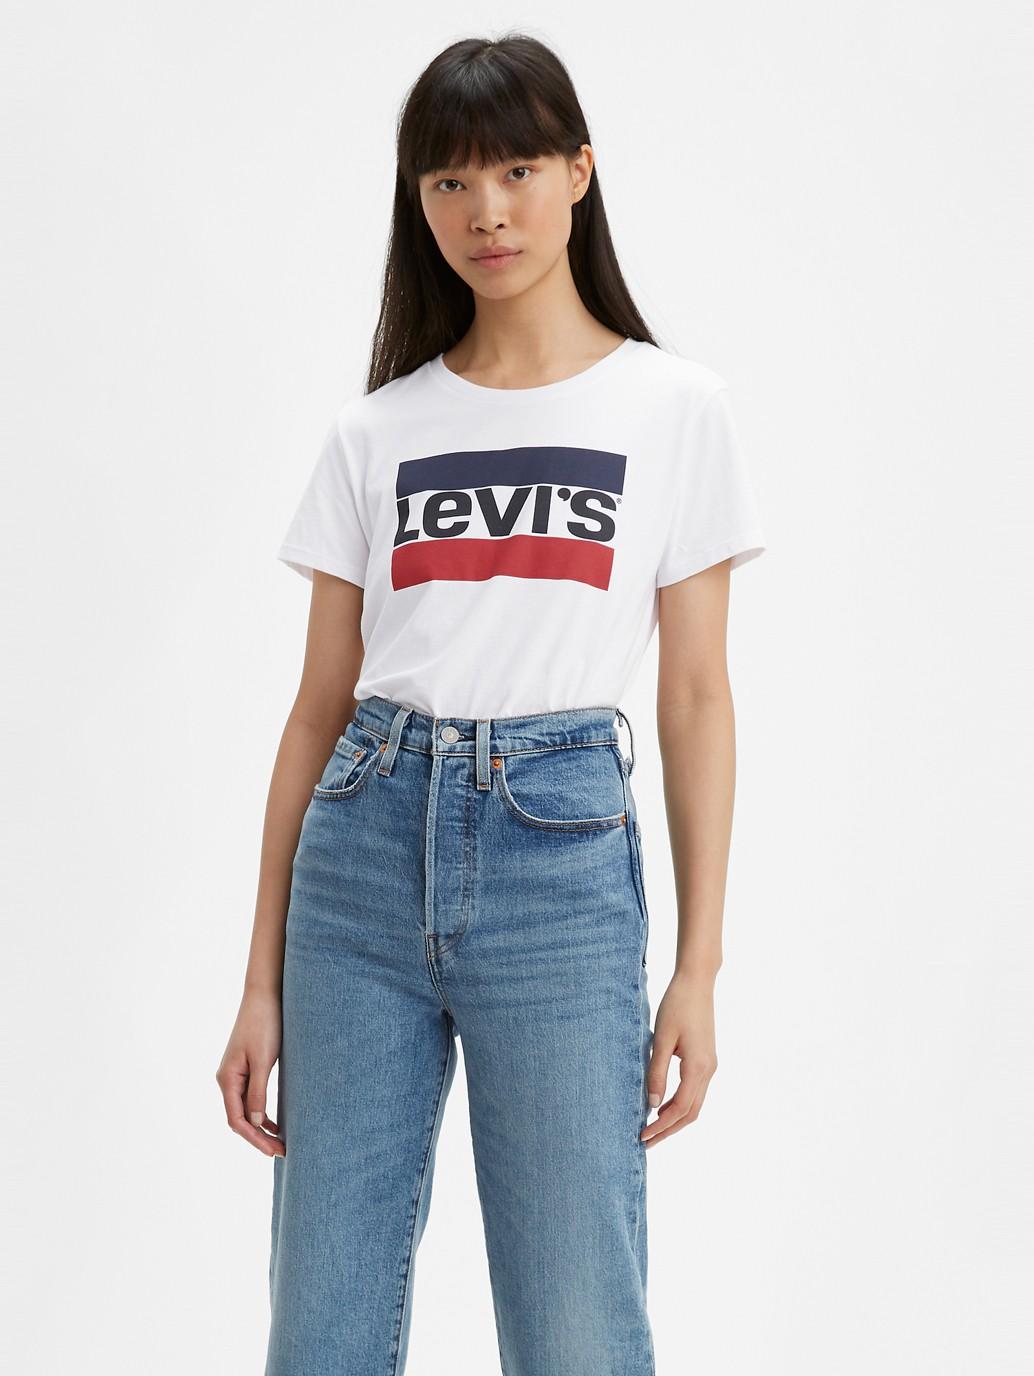 Levi's® Women's Perfect Tee | Levi's® Official Online Store SG